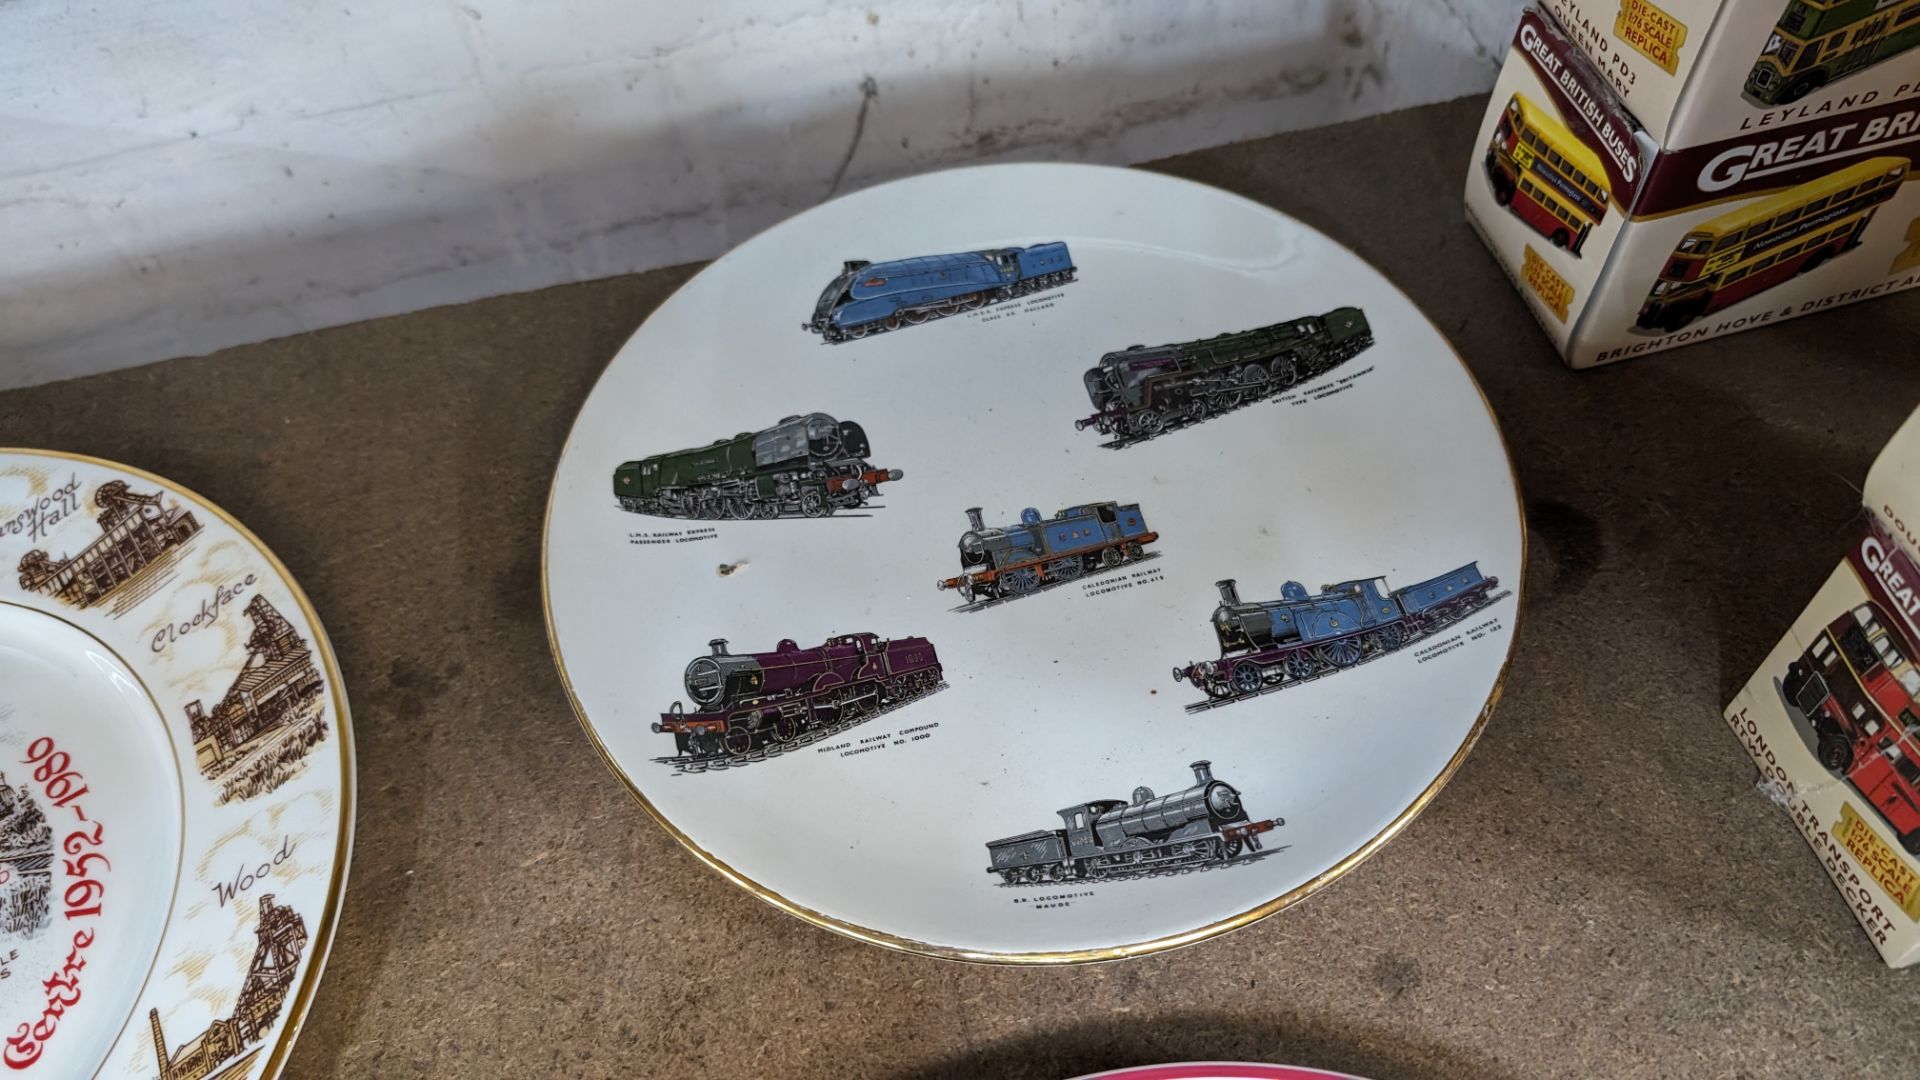 2 off railway related decorative plates, one plate being limited edition plate 269 - Image 5 of 6